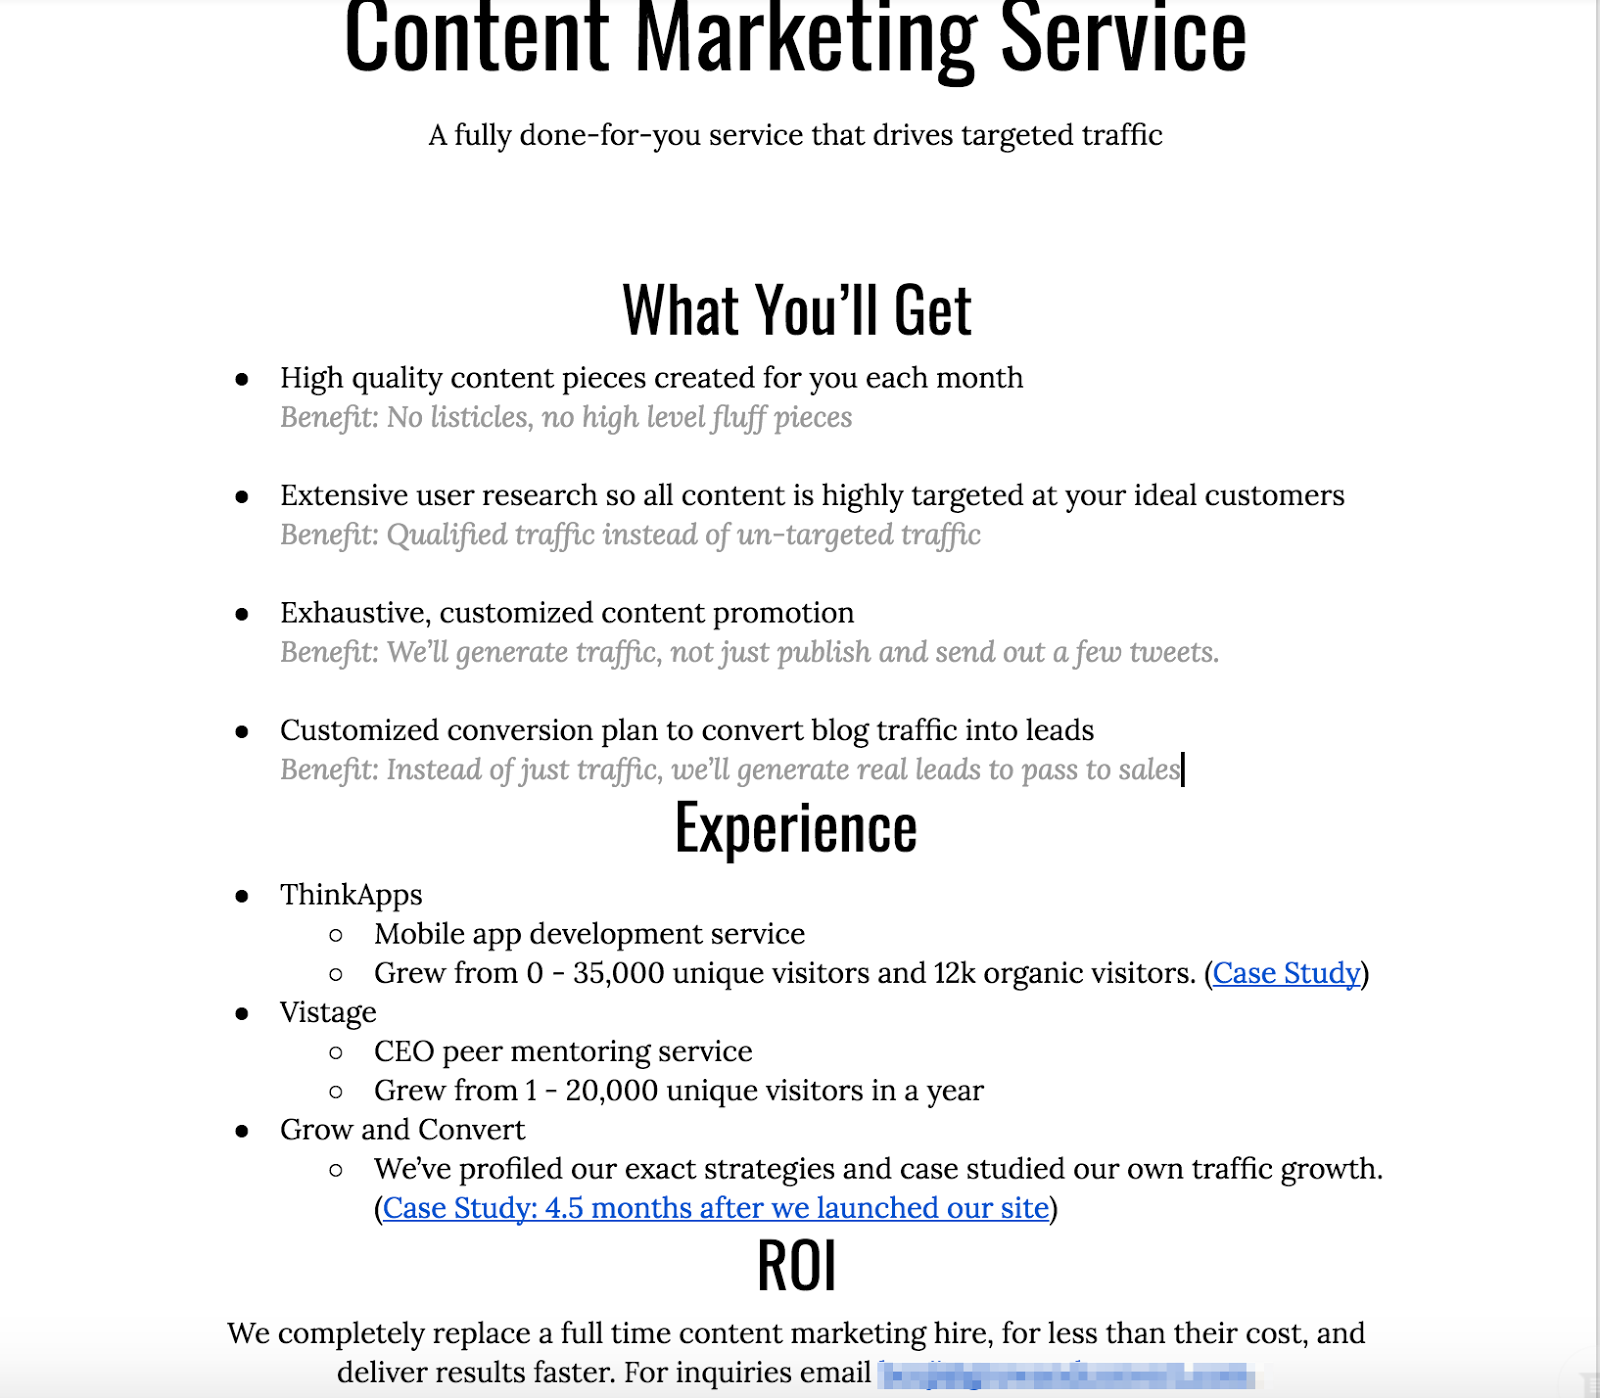 Content Marketing Done For You by Grow and Convert Google Docs